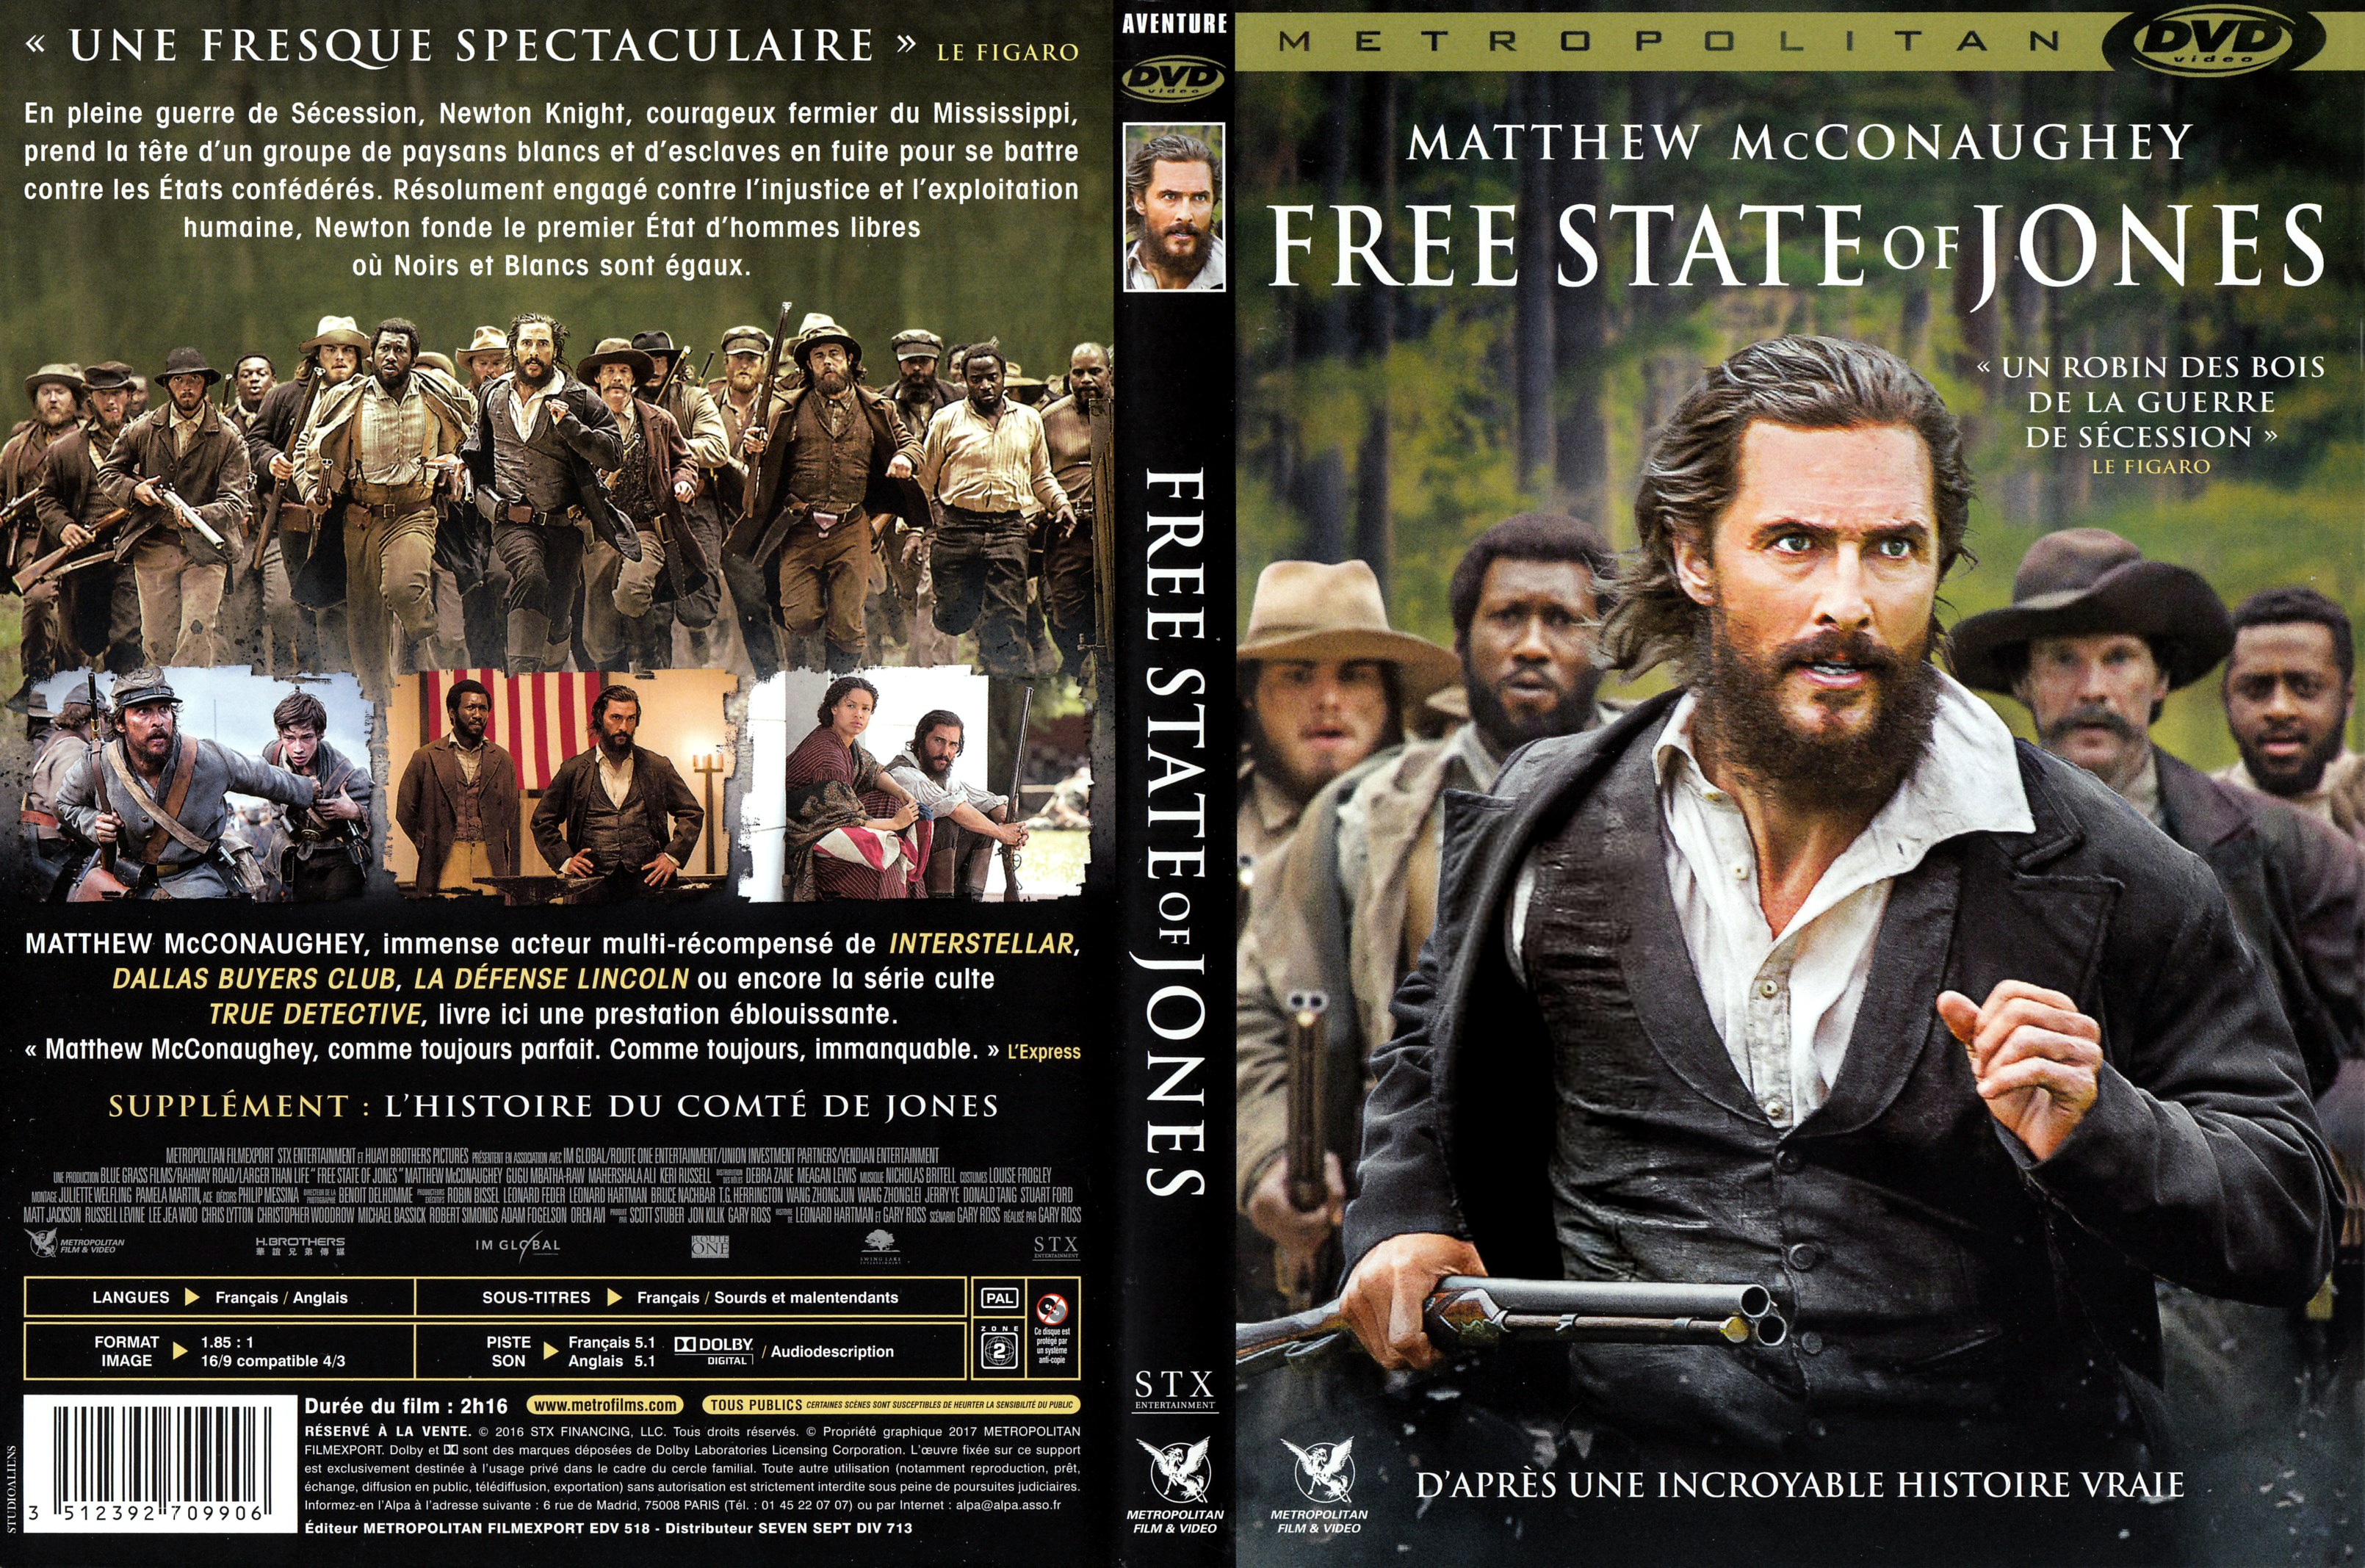 Jaquette DVD Free State Of Jones